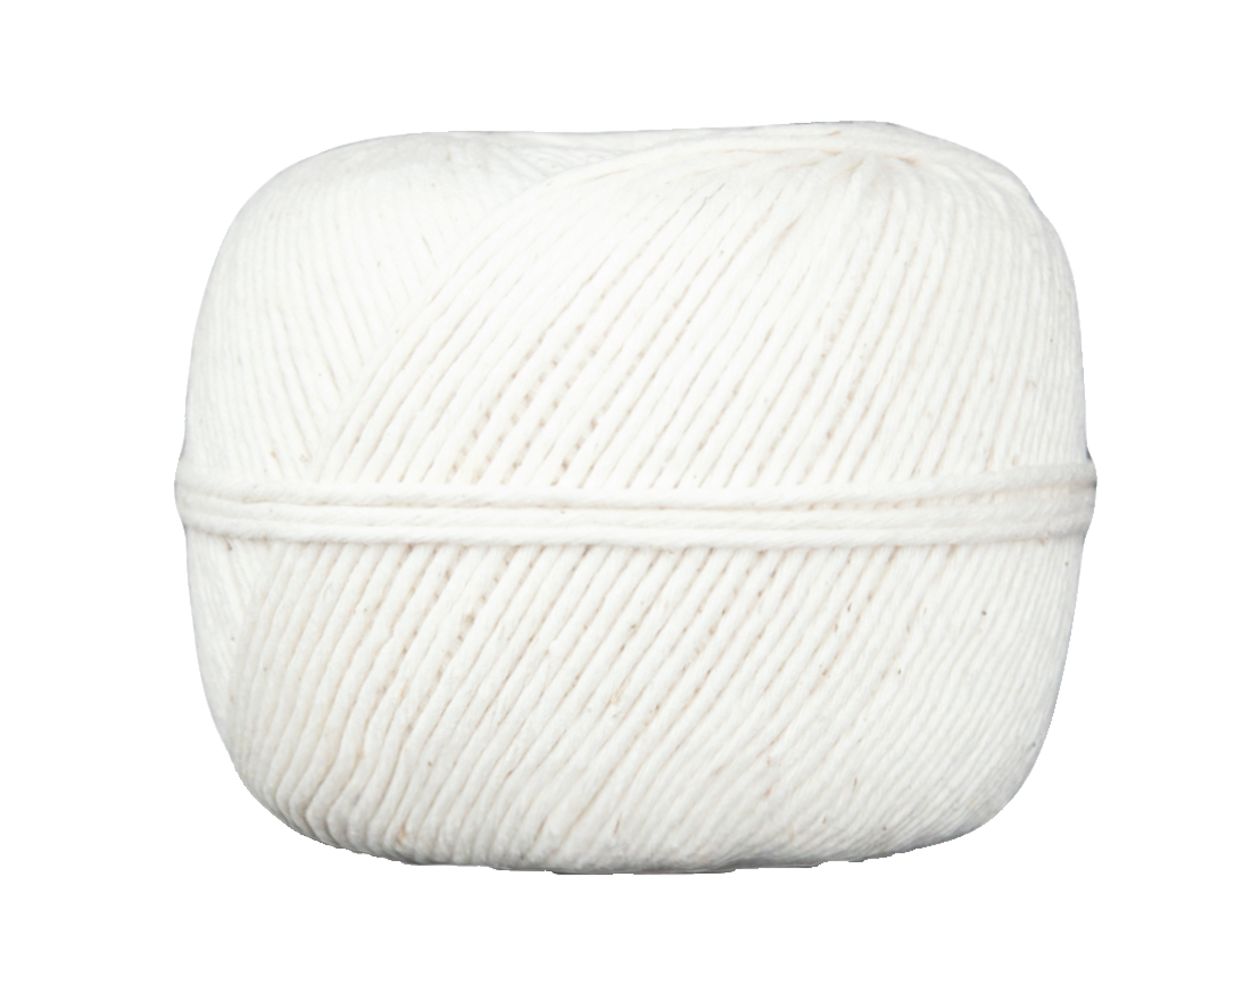 10-Ply 475' Ball of Twine, White Cotton, 6 Rolls per Pack